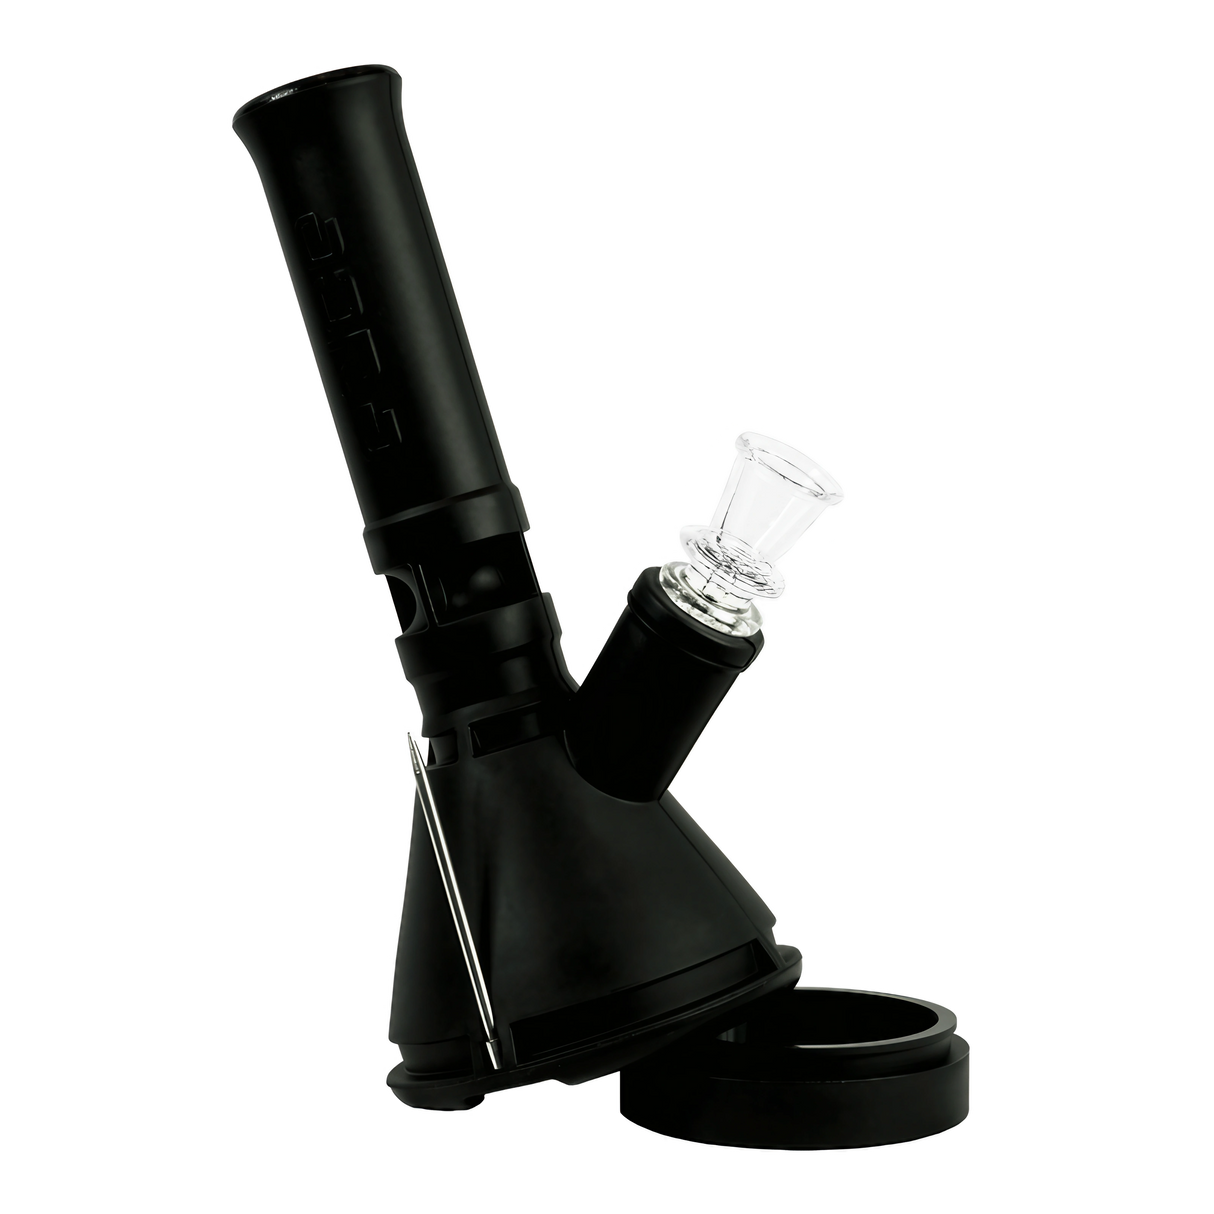 EYCE Mini Beaker in black silicone, 7.25" tall with 14mm joint, durable travel-friendly design